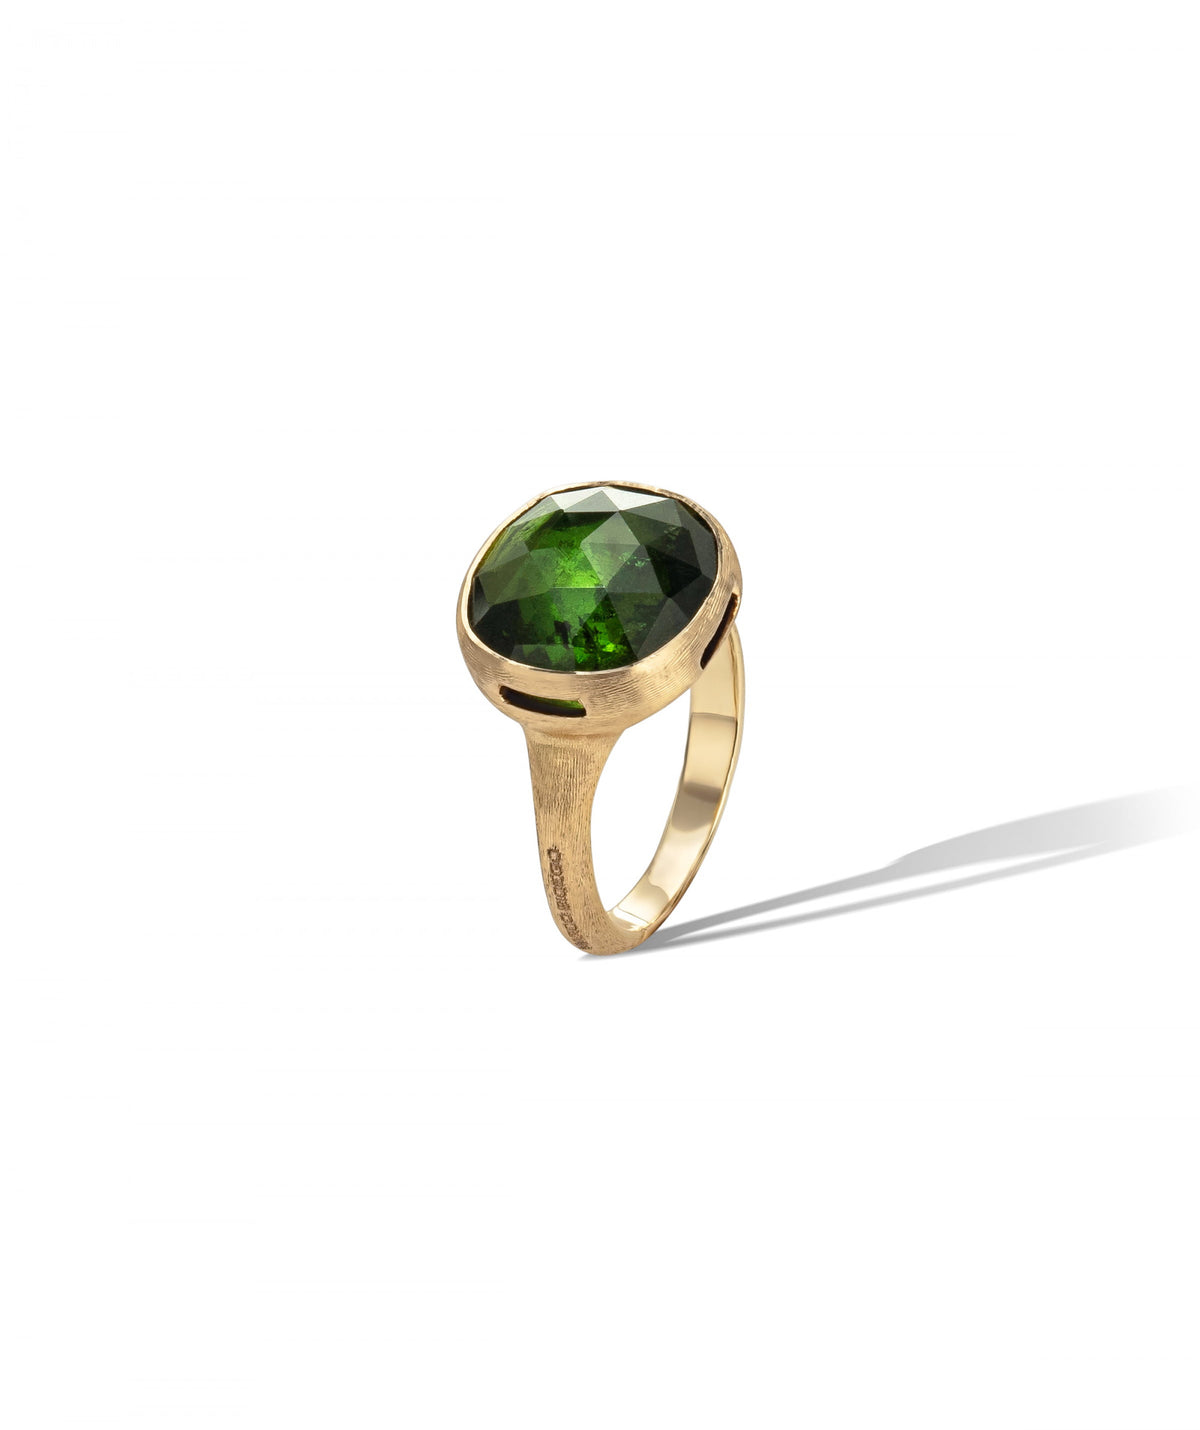 Jaipur Colour Ring in 18k Yellow Gold with Green Tourmaline Large - Orsini Jewellers NZ